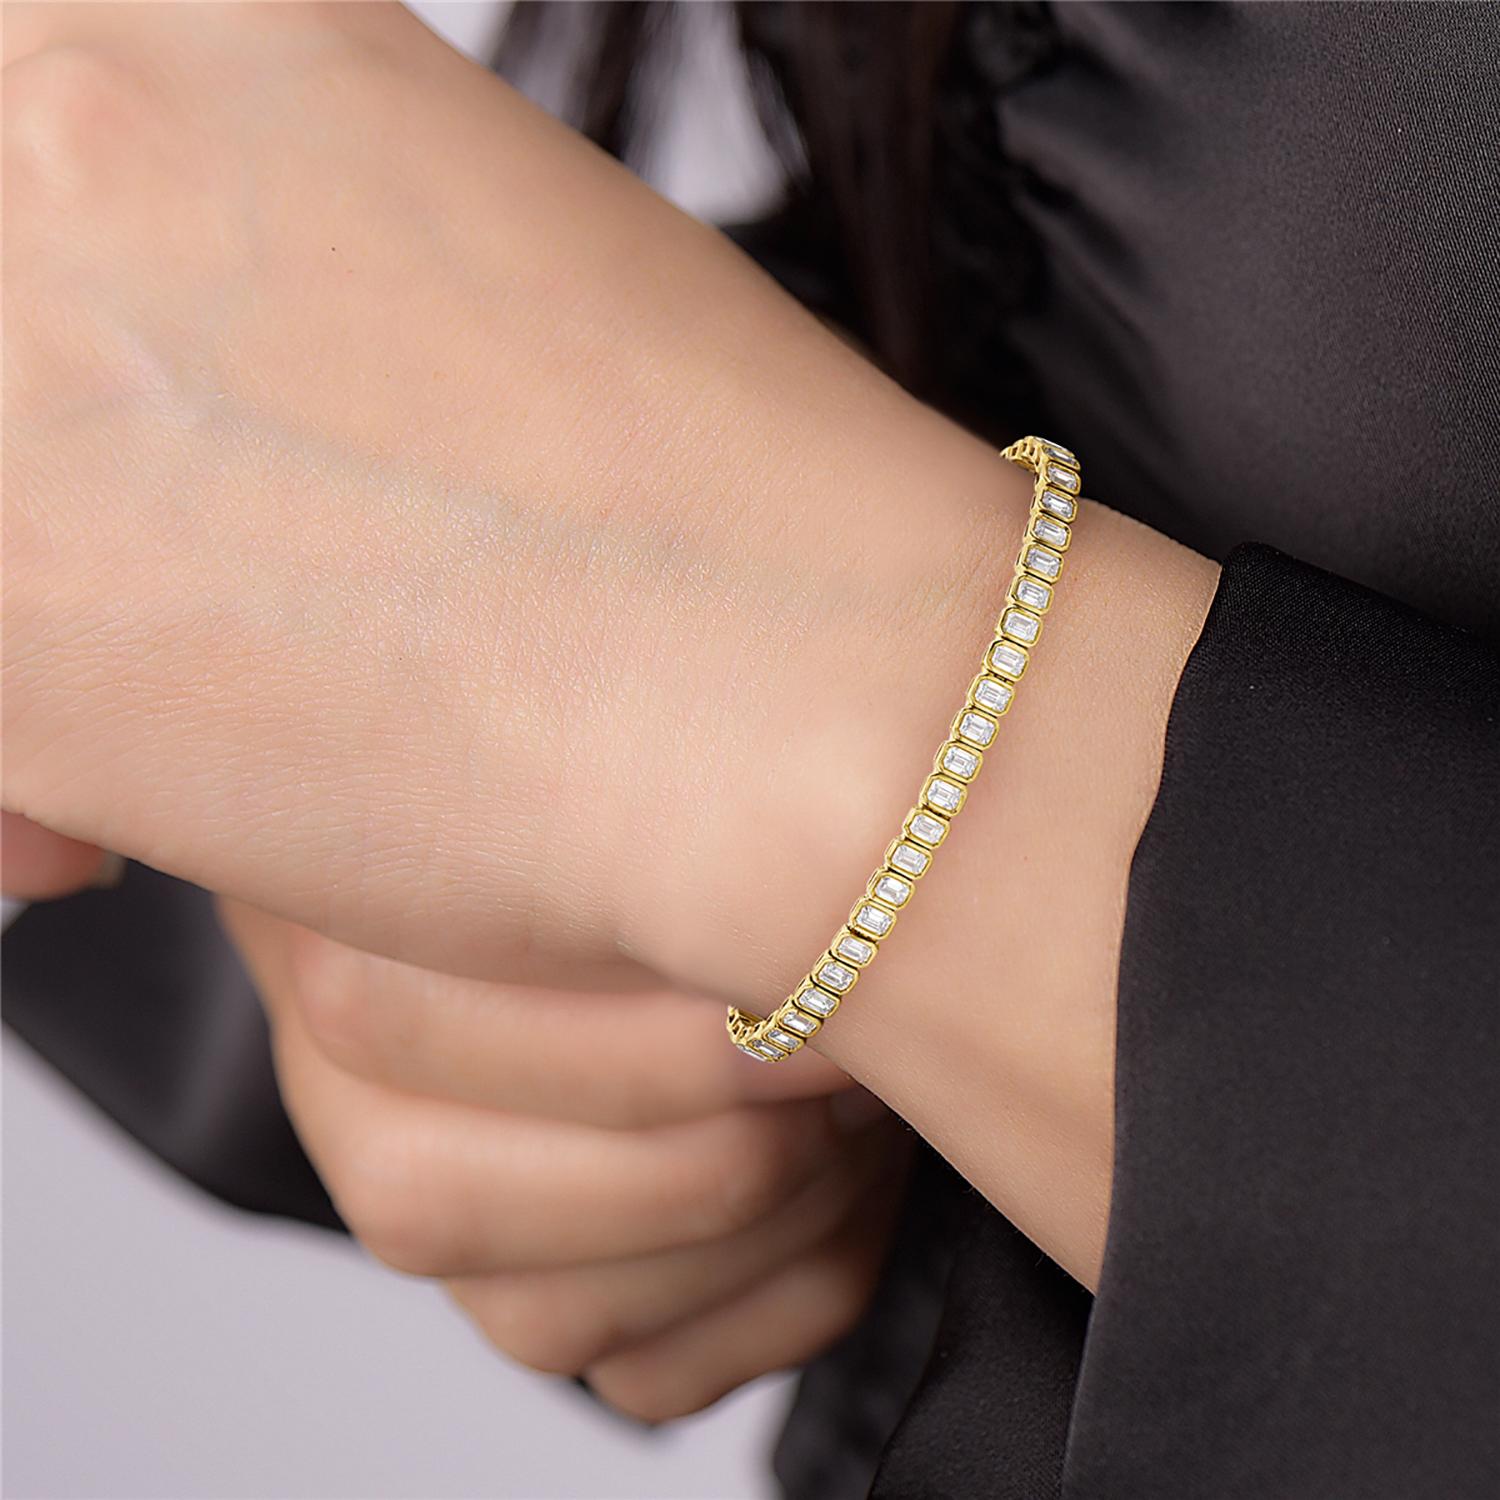 Crafted from high-quality 14k yellow gold, this bracelet features a classic design with a line of octogen-cut diamonds that are expertly set in a continuous row. Each diamond is carefully hand-selected for its exceptional quality and brilliance,